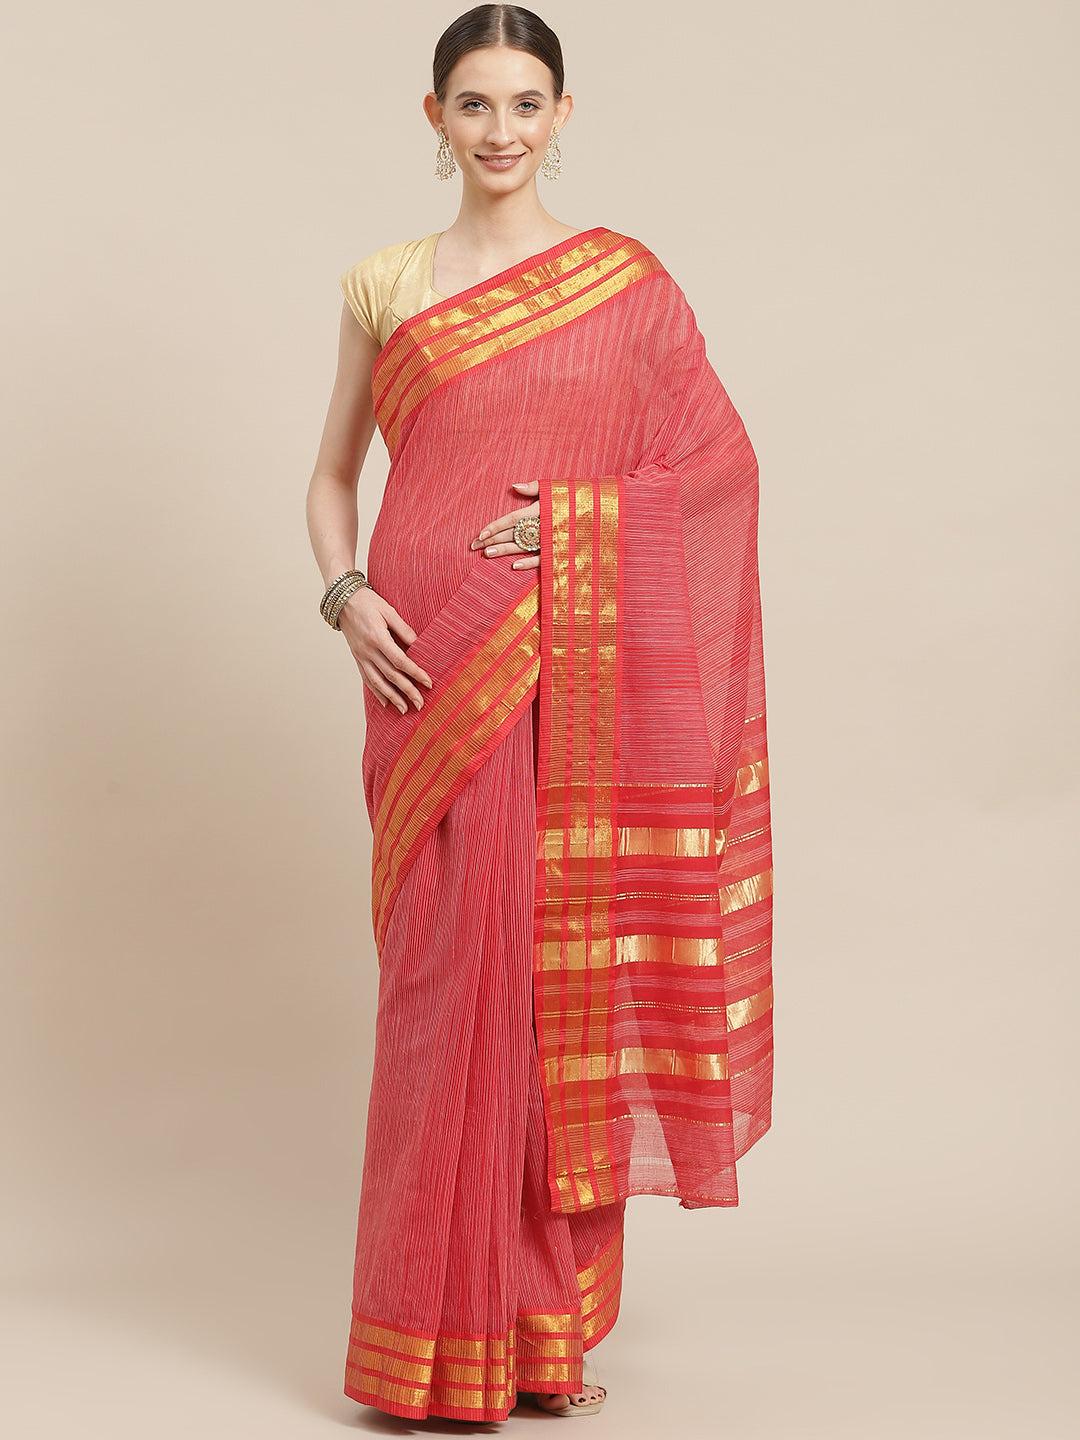 ishin-women's-cotton-blend-red-striped-woven-design-saree-with-blouse-piece